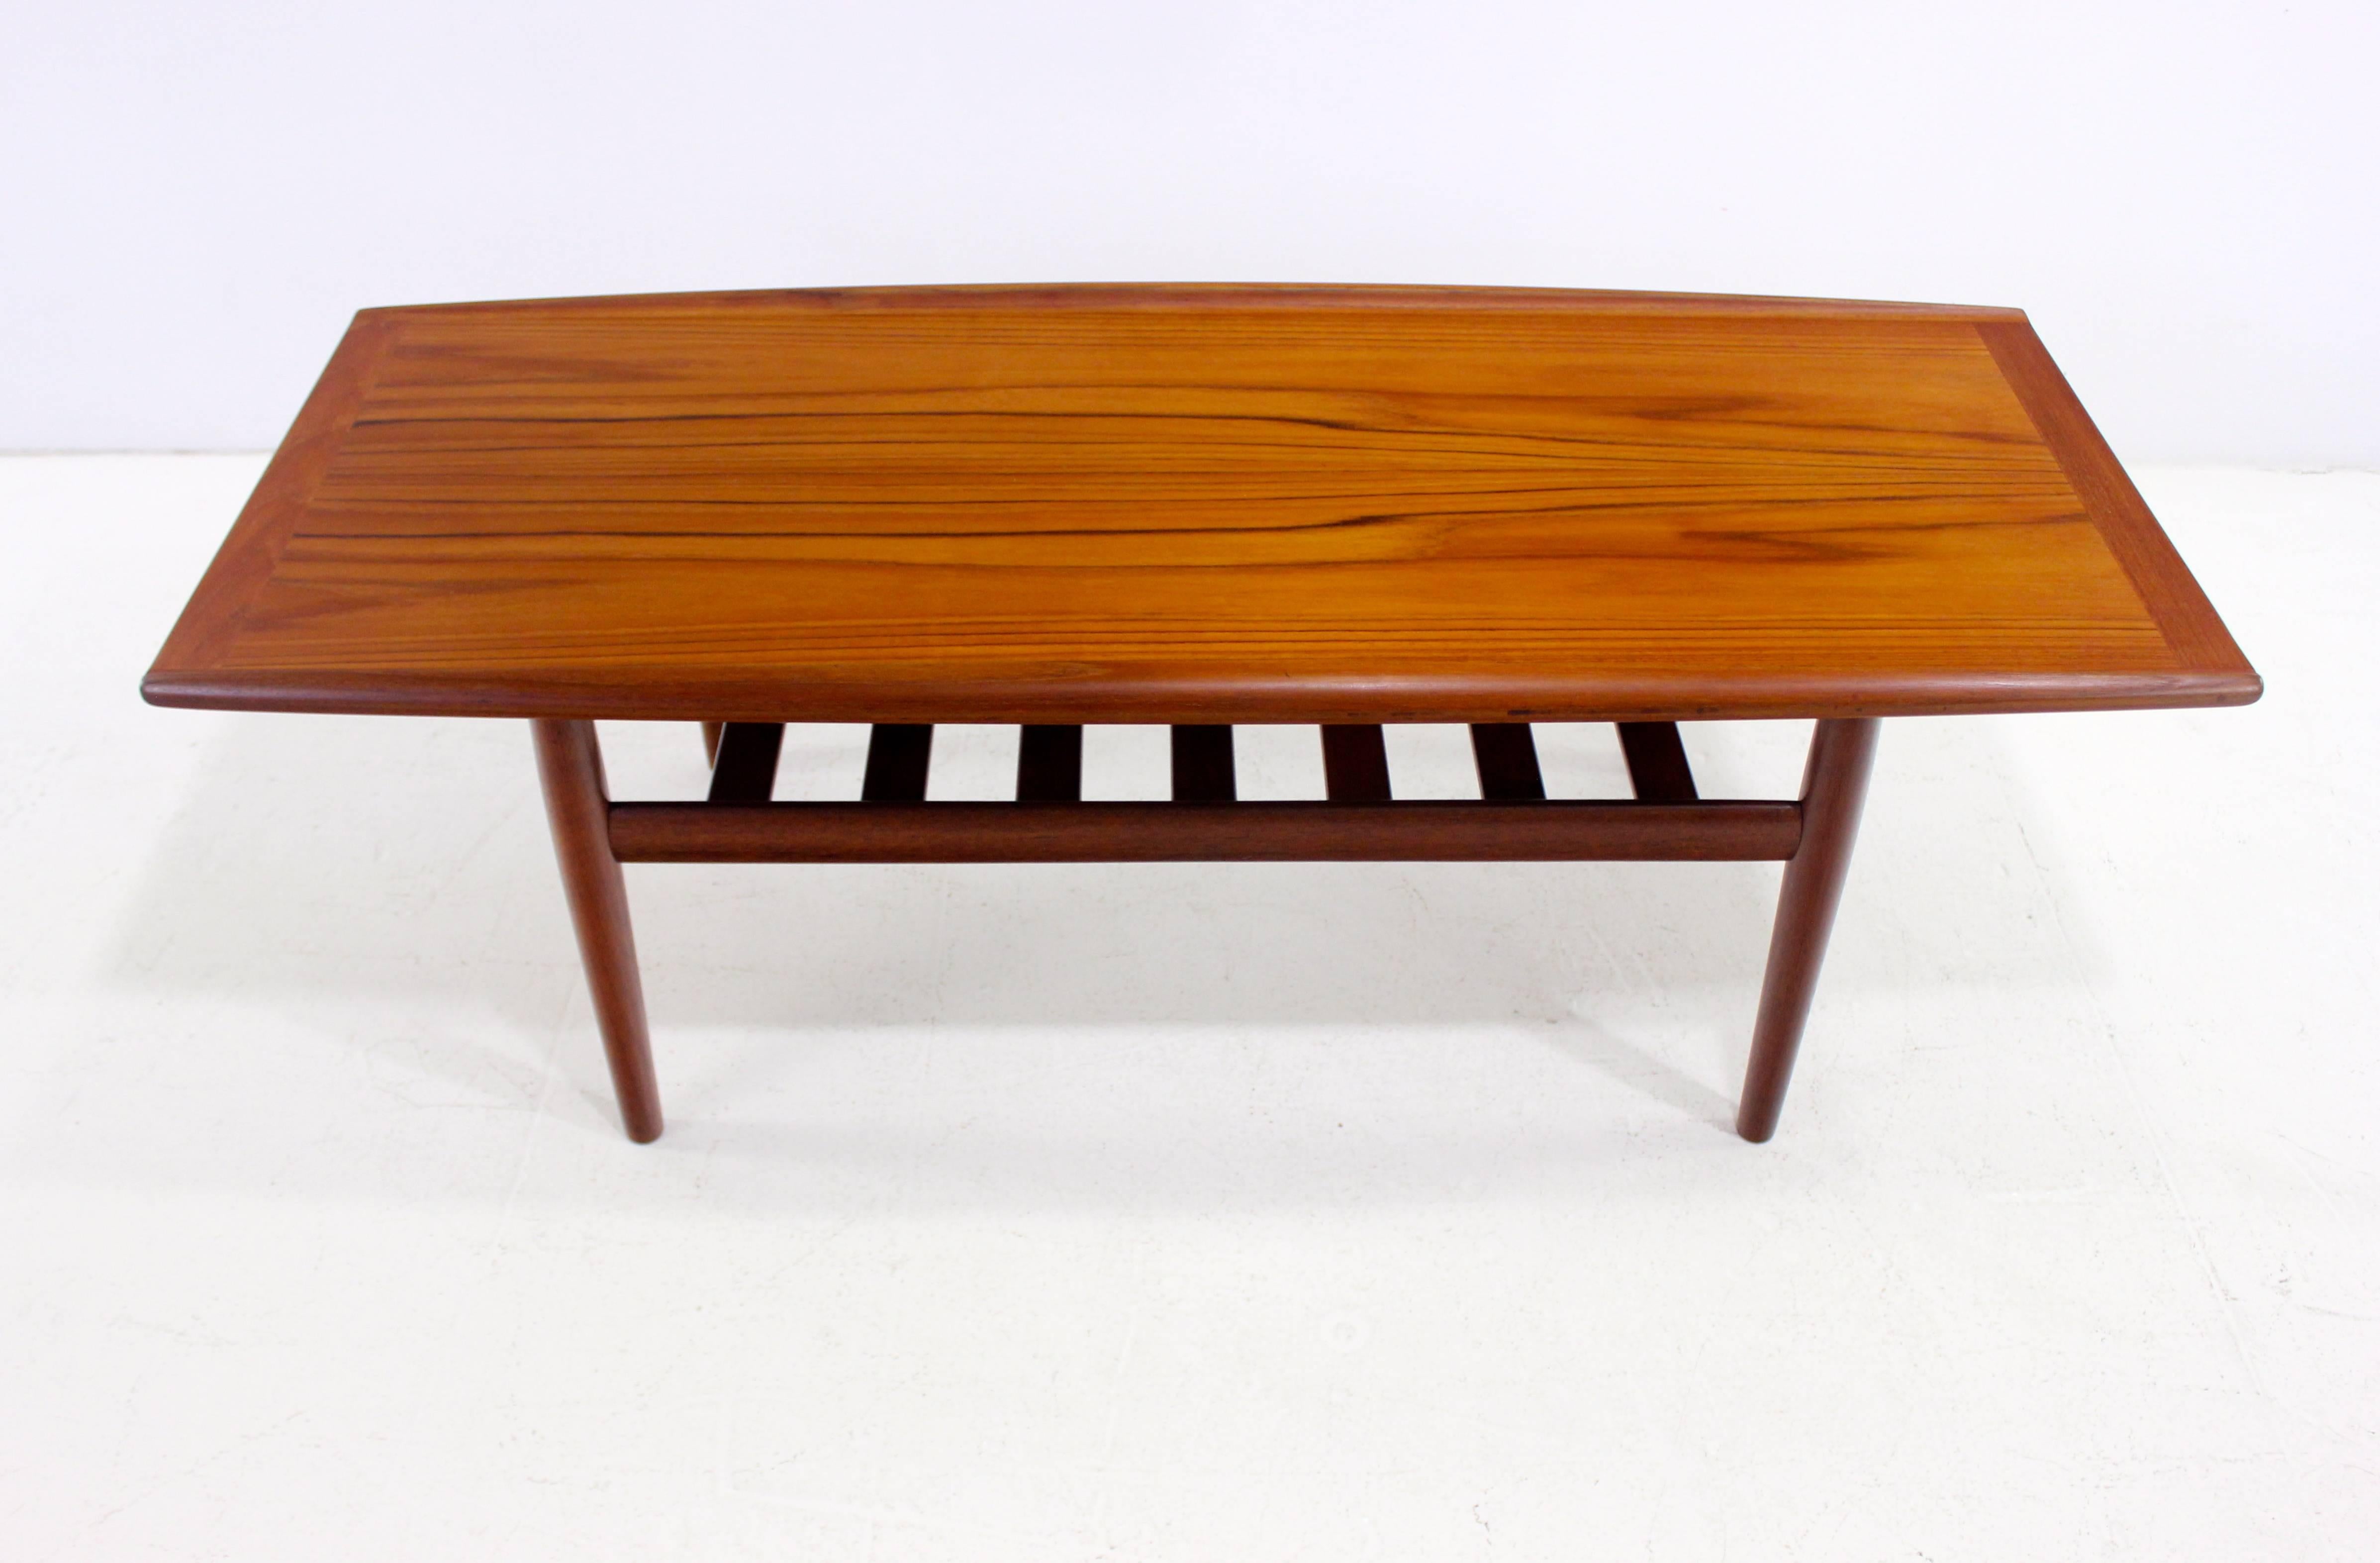 Danish modern coffee table designed by Grete Jalk.
Coveted smaller size.
Solid teak with curved edges.
Lower slated shelf.
Professionally restored and refinished by LookModern.
Matchless quality and price.
Low freight, quick ship.